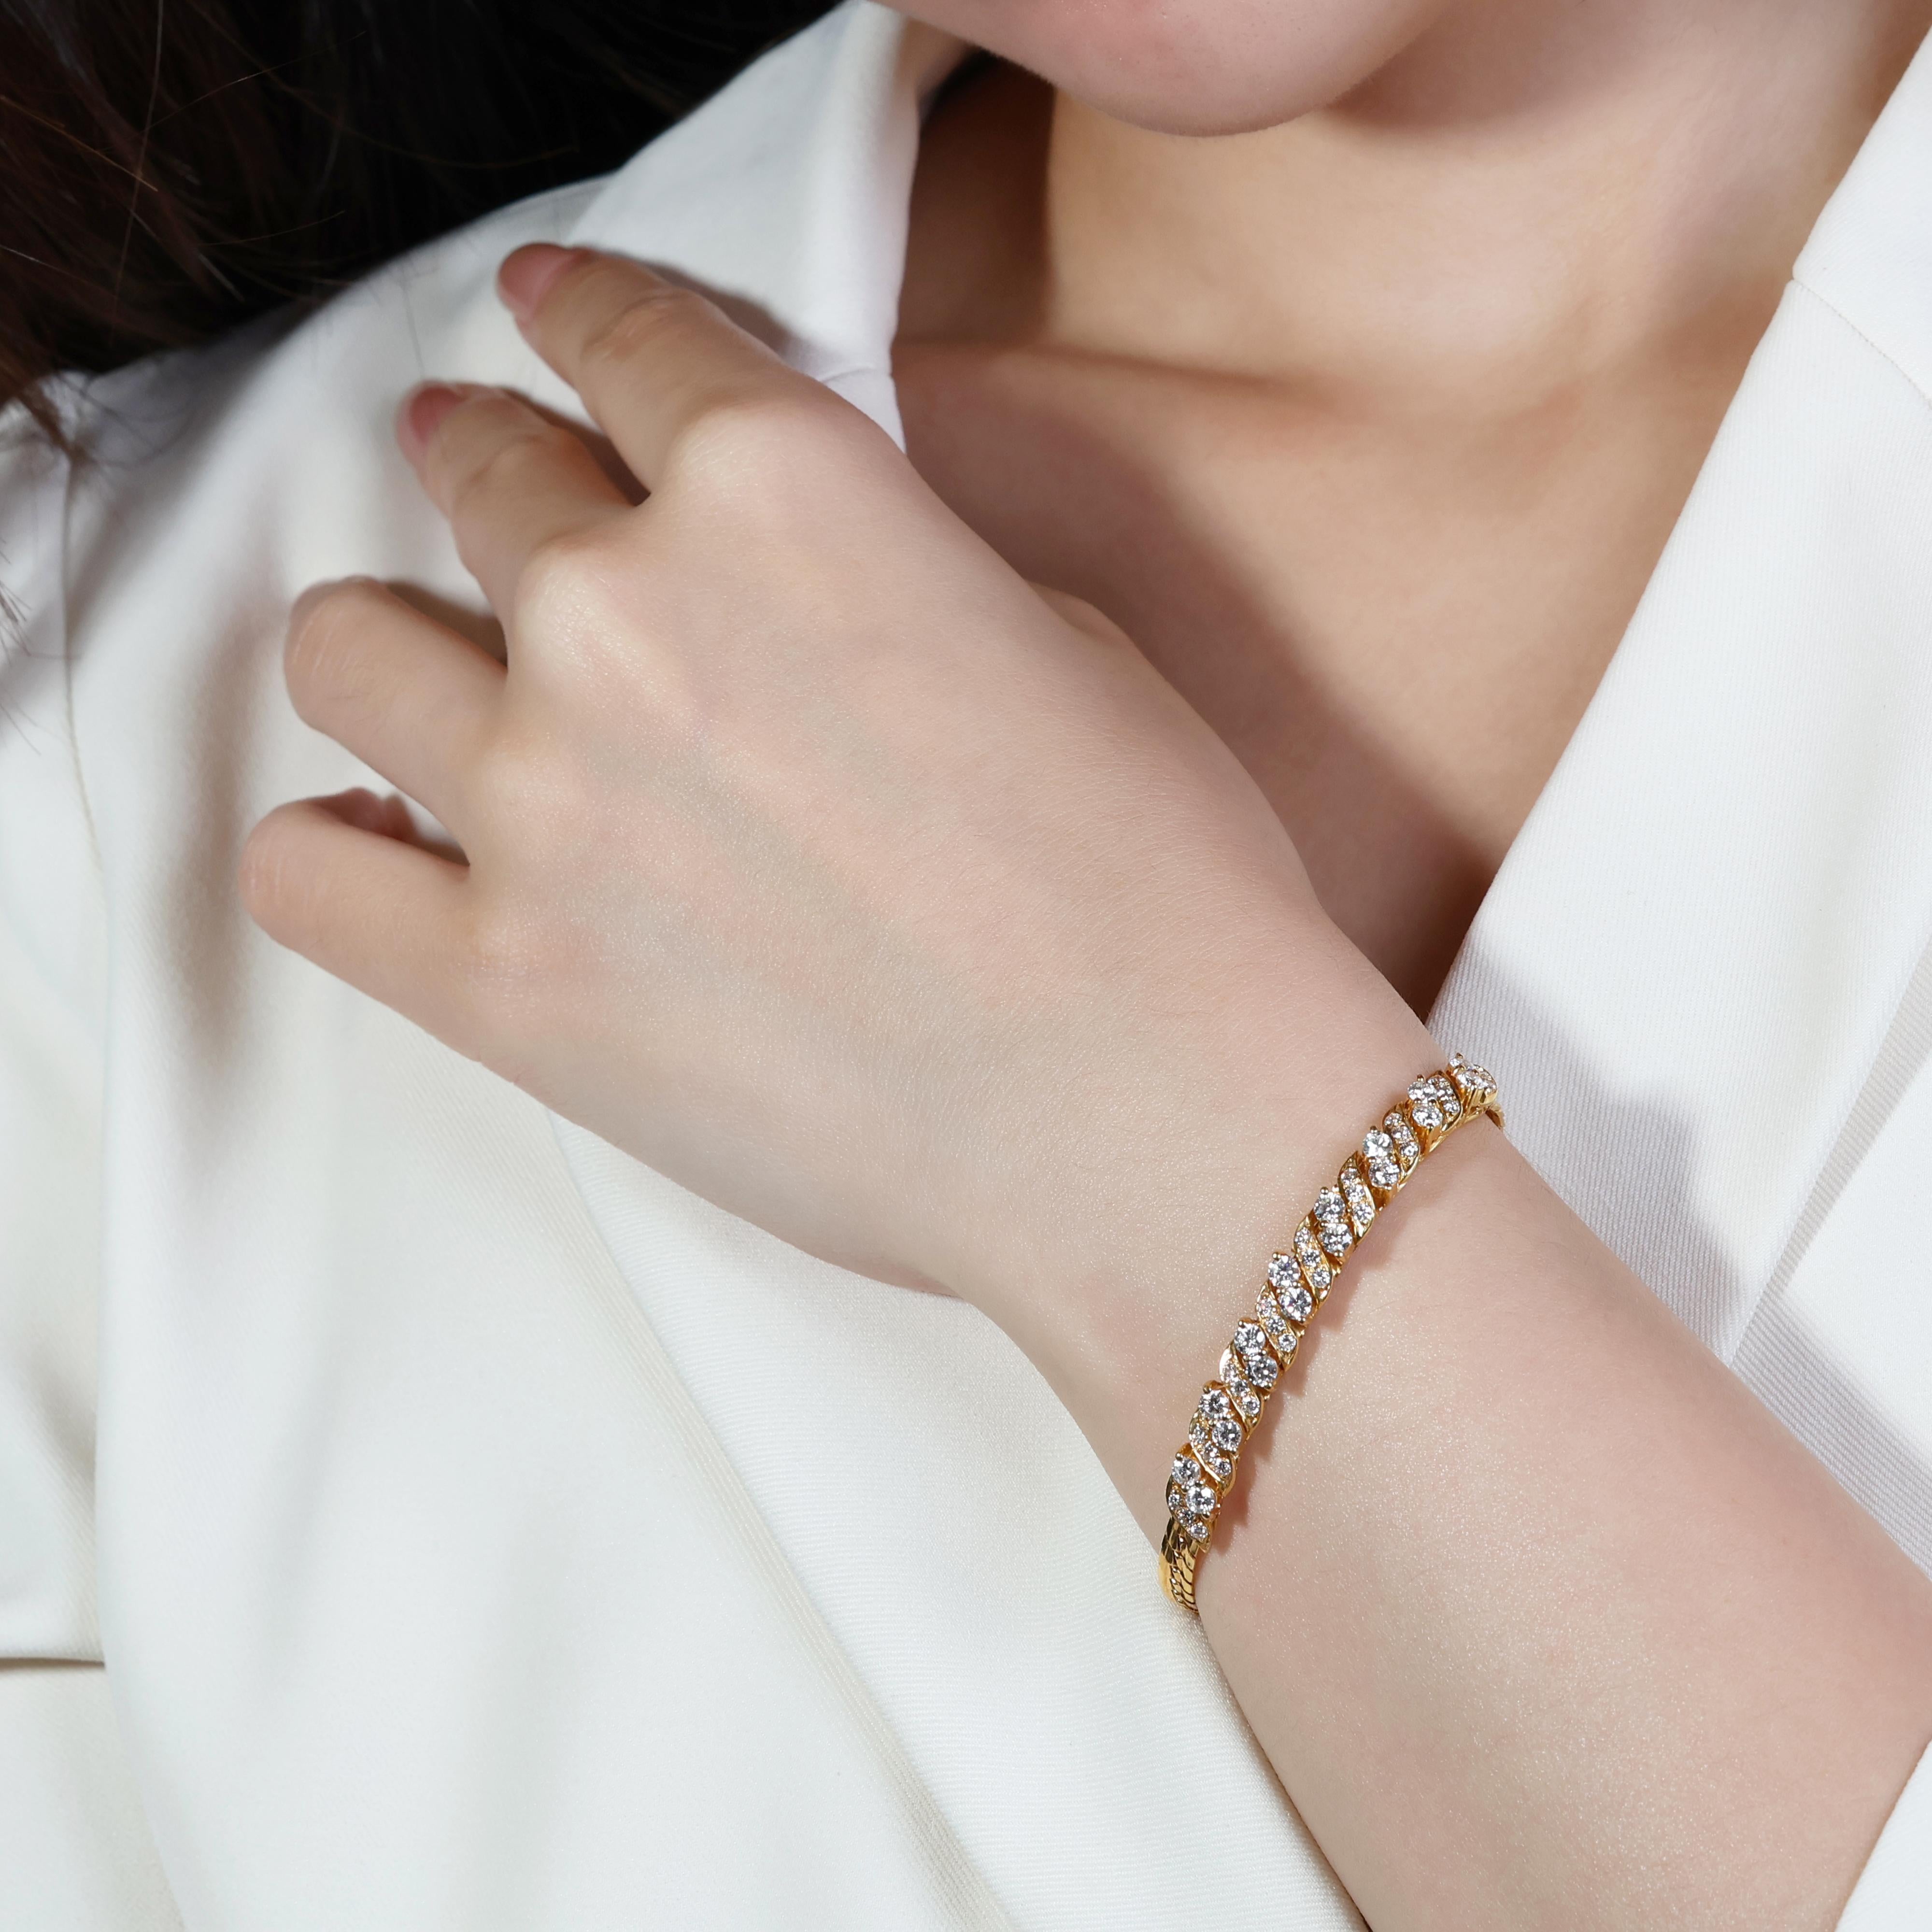 This exquisite 20k yellow gold bracelet is a captivating masterpiece designed to turn heads and capture hearts. With a total carat weight of 1.87ct, this bracelet offers a remarkable presence, solidifying its status as a luxurious statement piece.